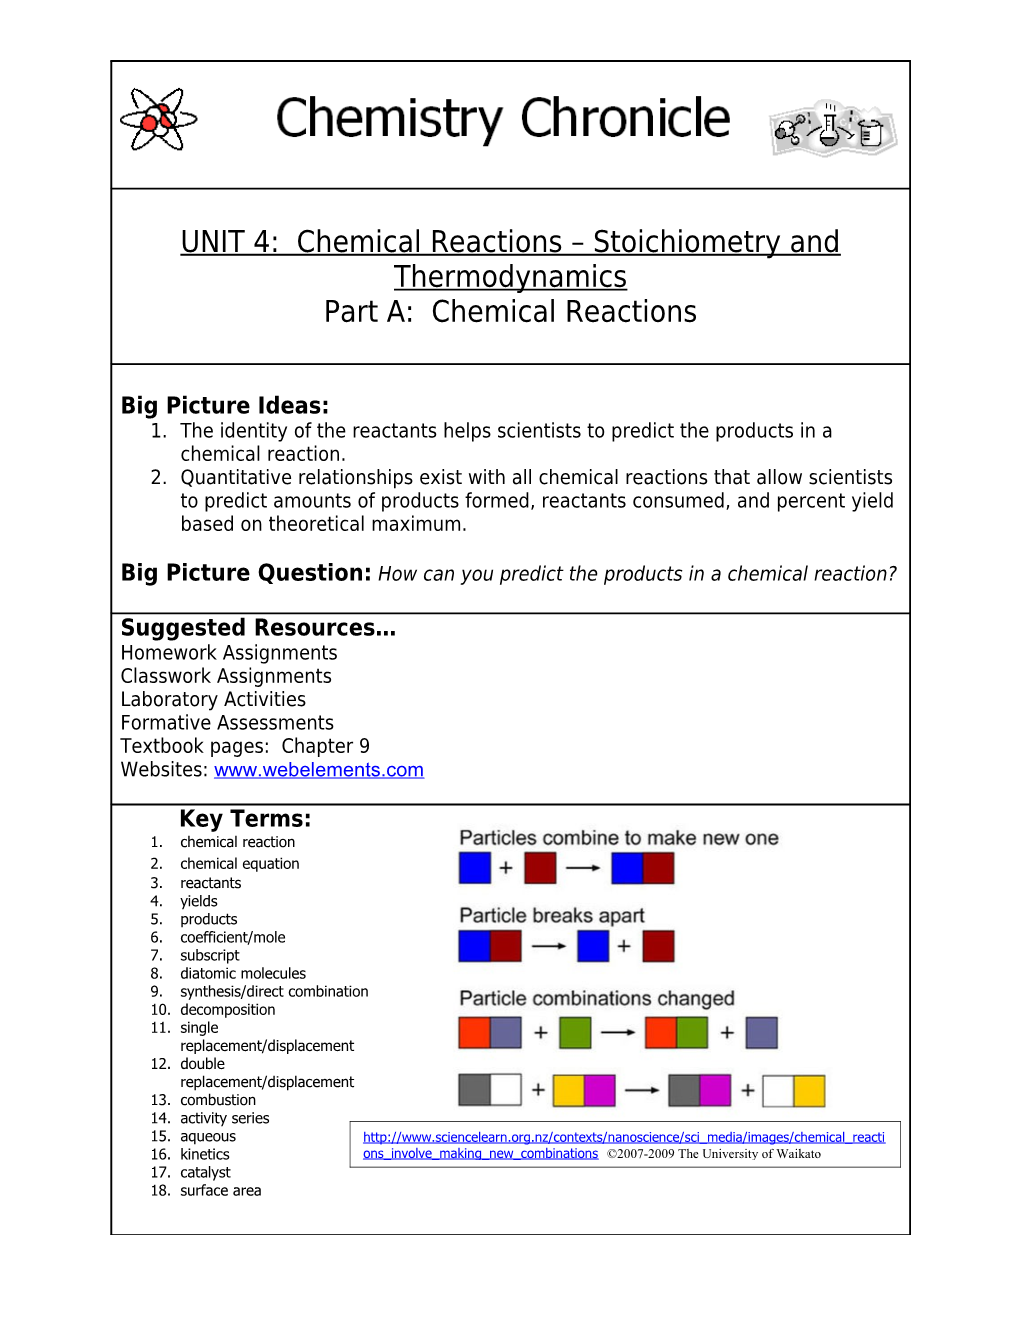 Notes: Chemical Reactions